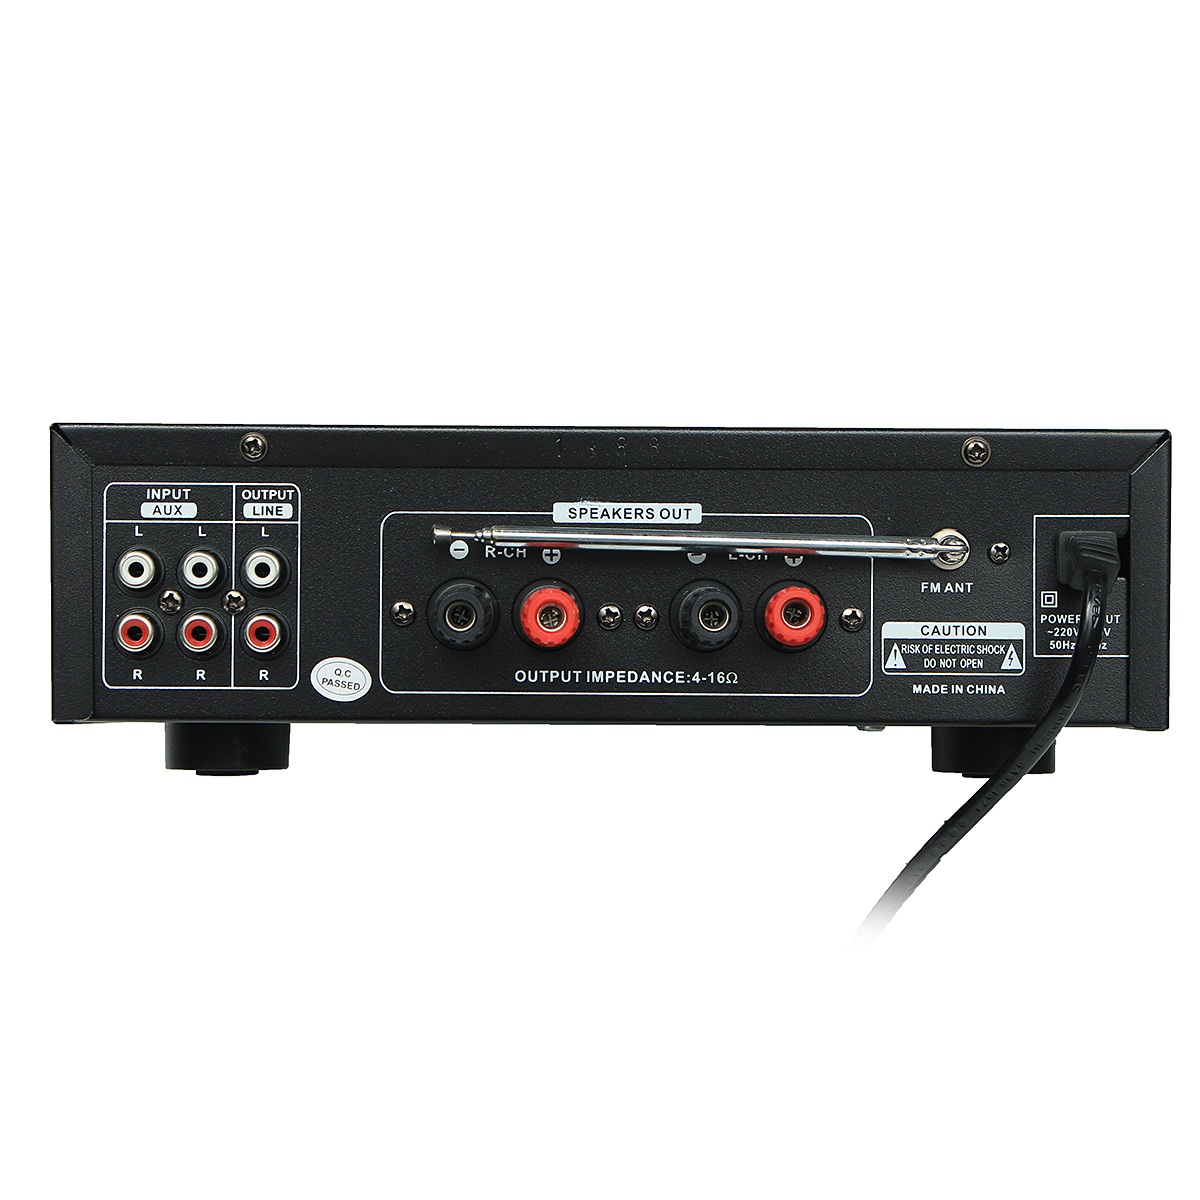 Find TELI BT 1388 HiFi bluetooth Power Amplifier Stereo Audio Karaoke FM Receiver USB SD for Sale on Gipsybee.com with cryptocurrencies